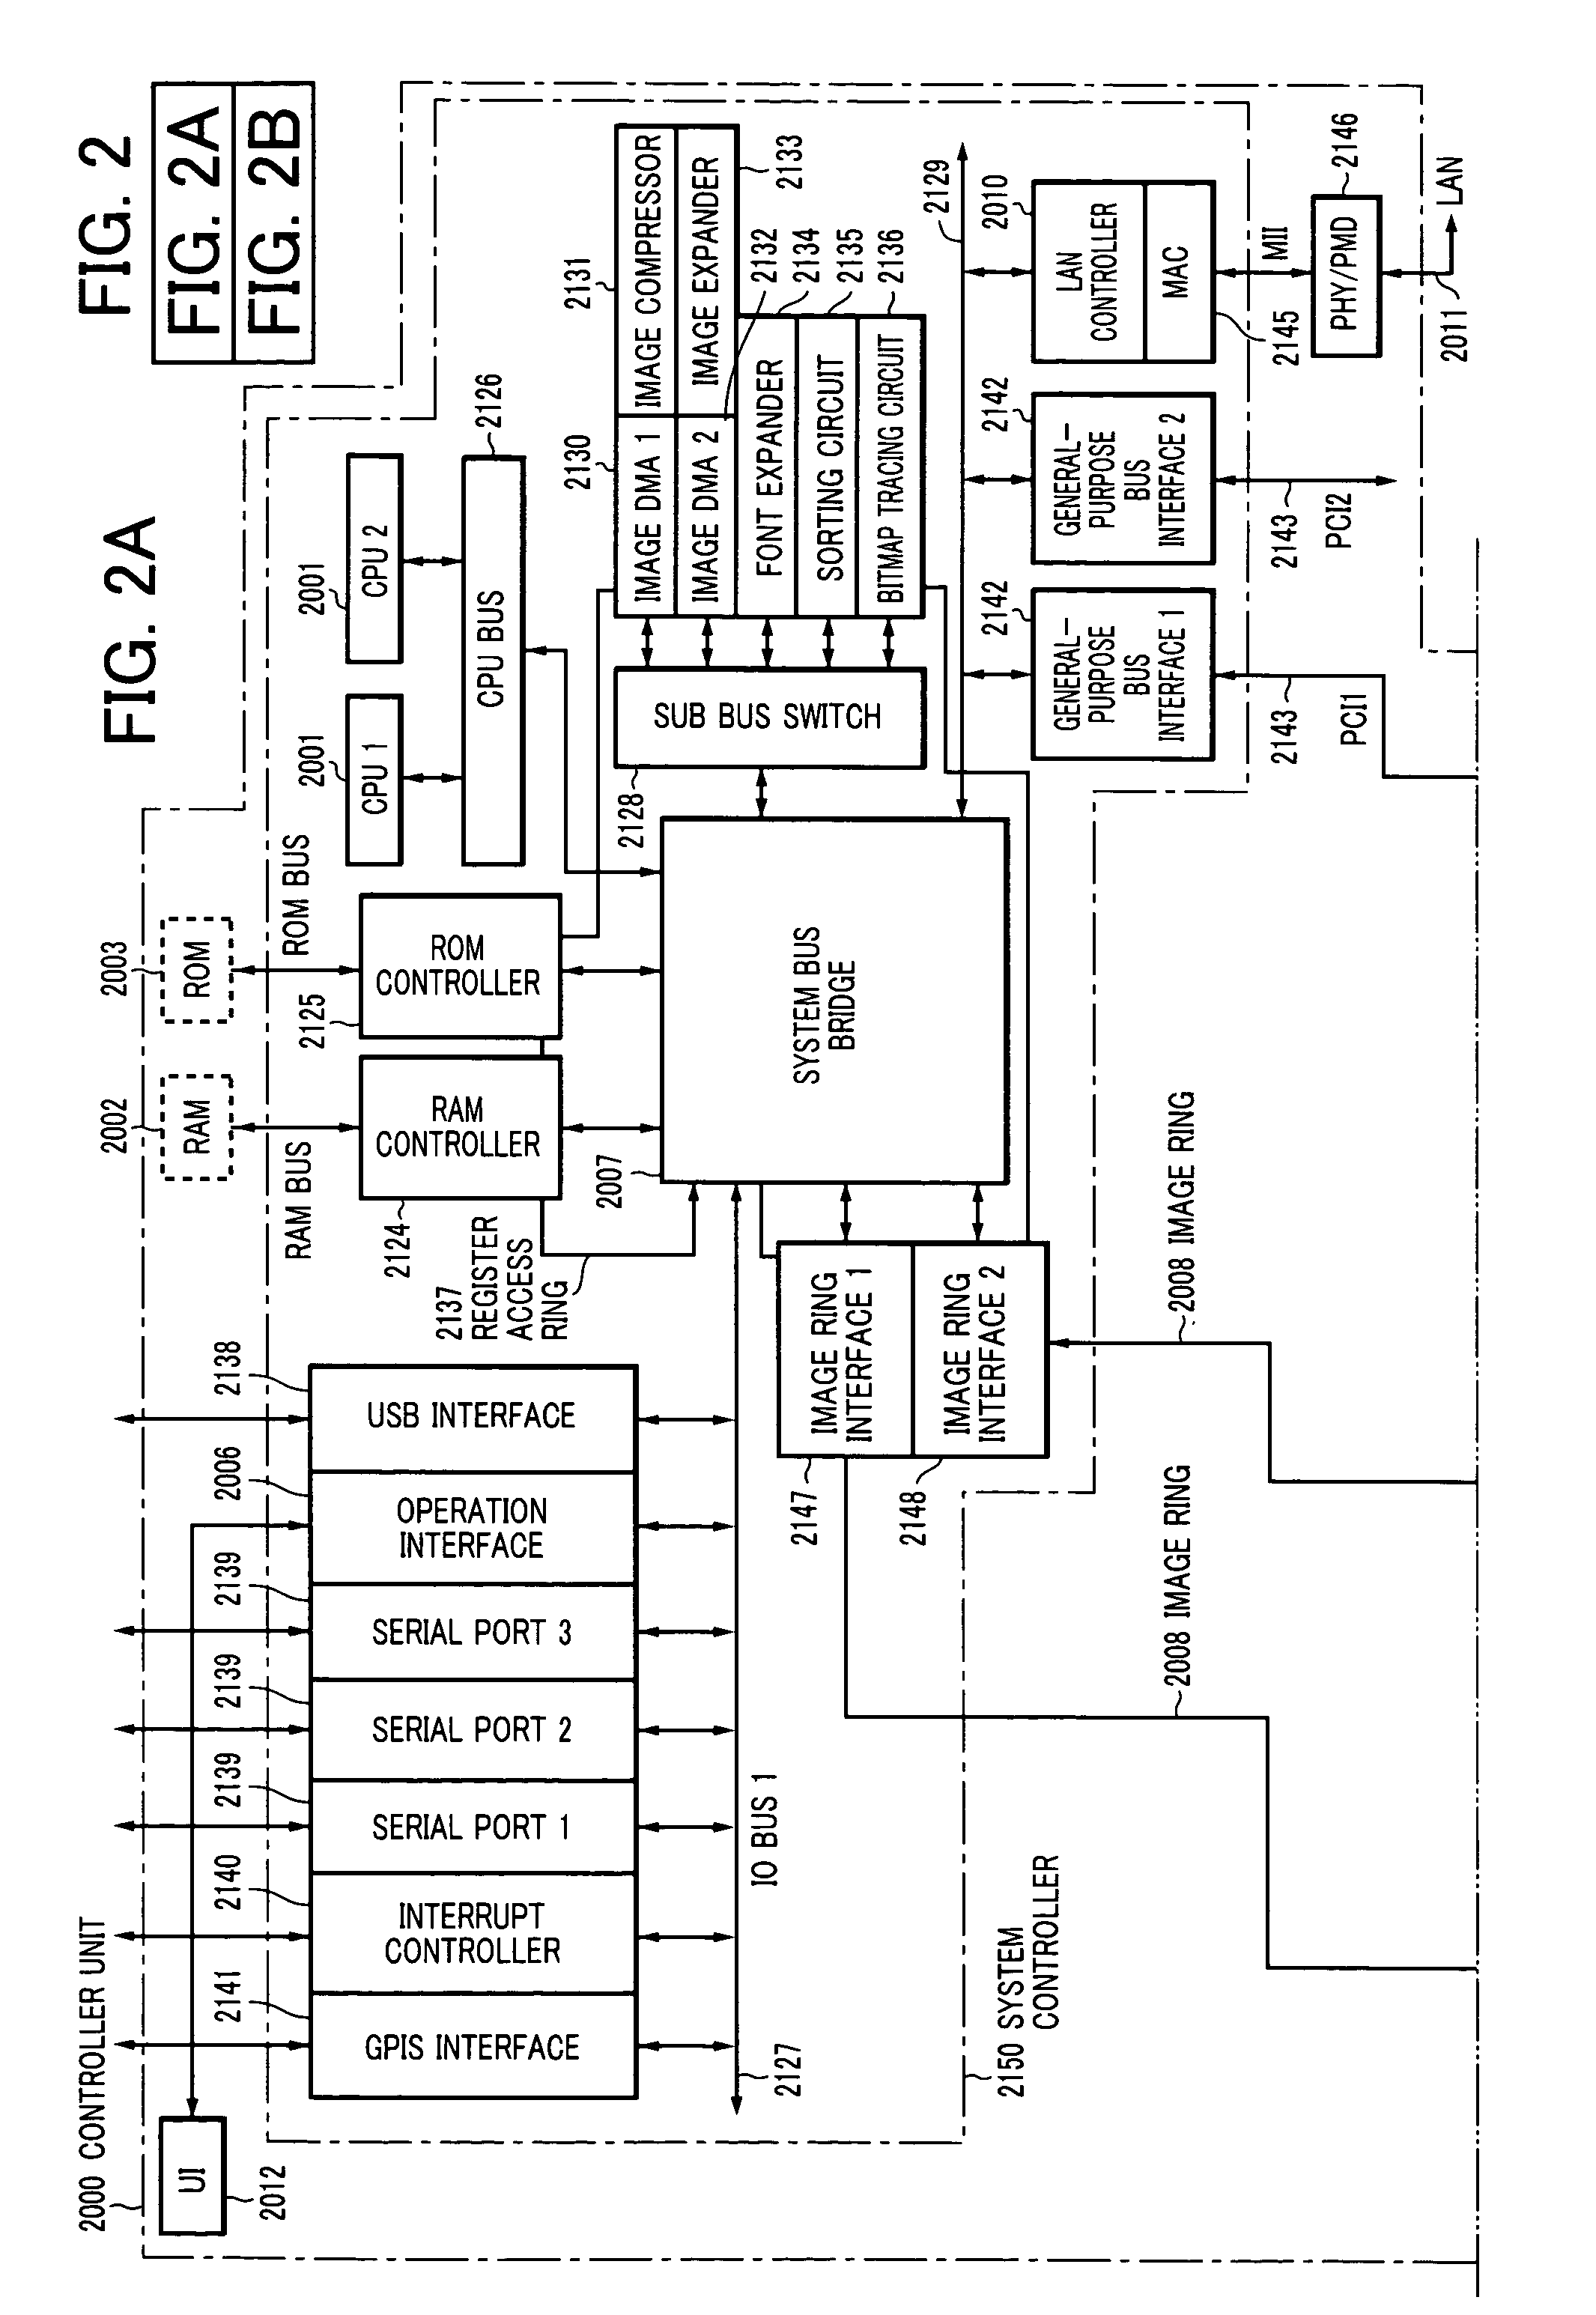 Image processing apparatus, image processing method, and computer program